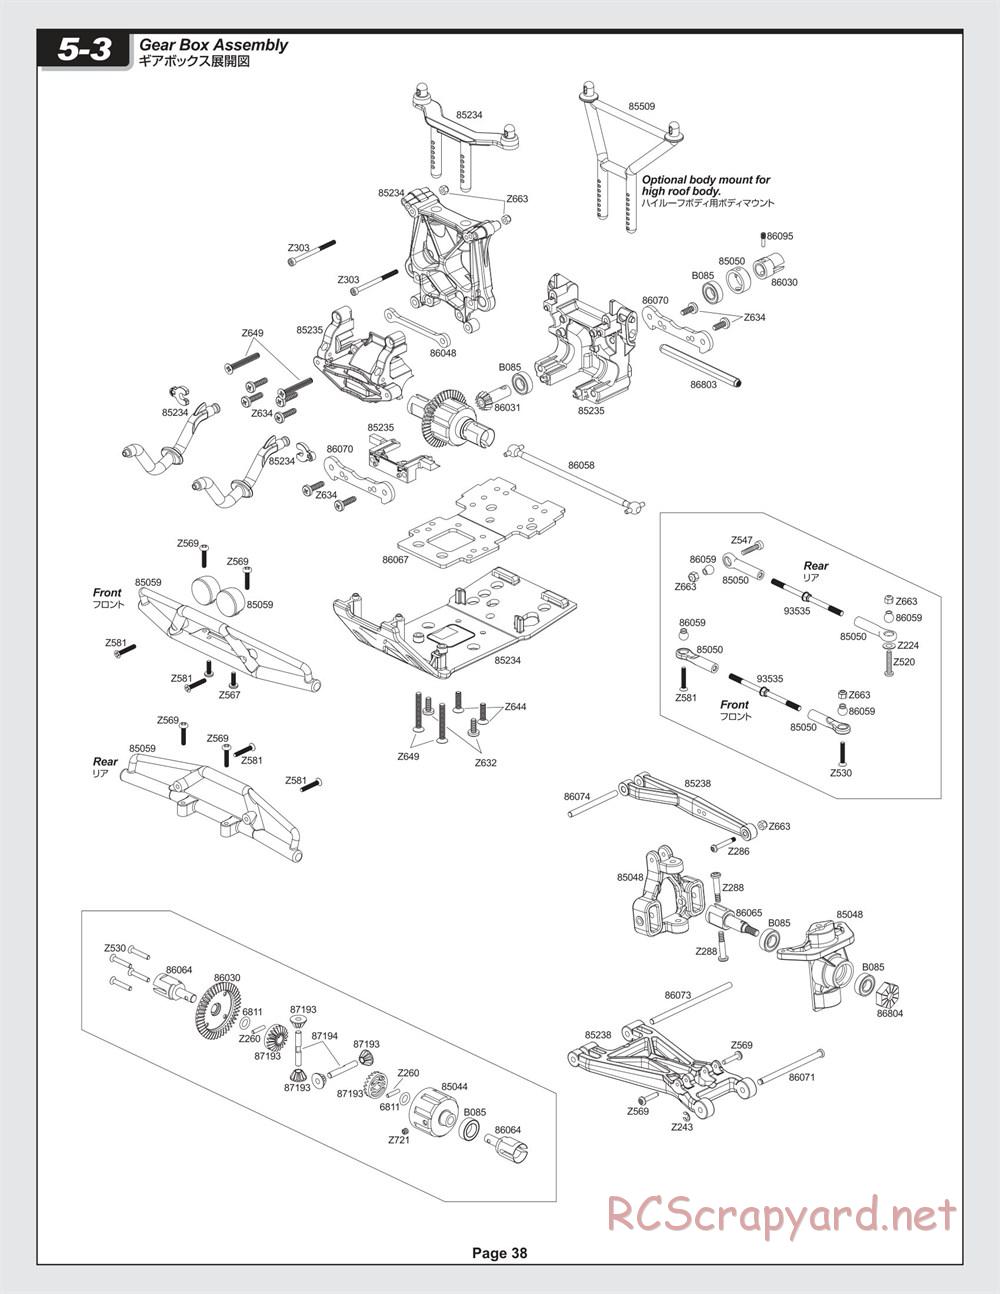 HPI - Savage X 4.1 - Exploded View - Page 38